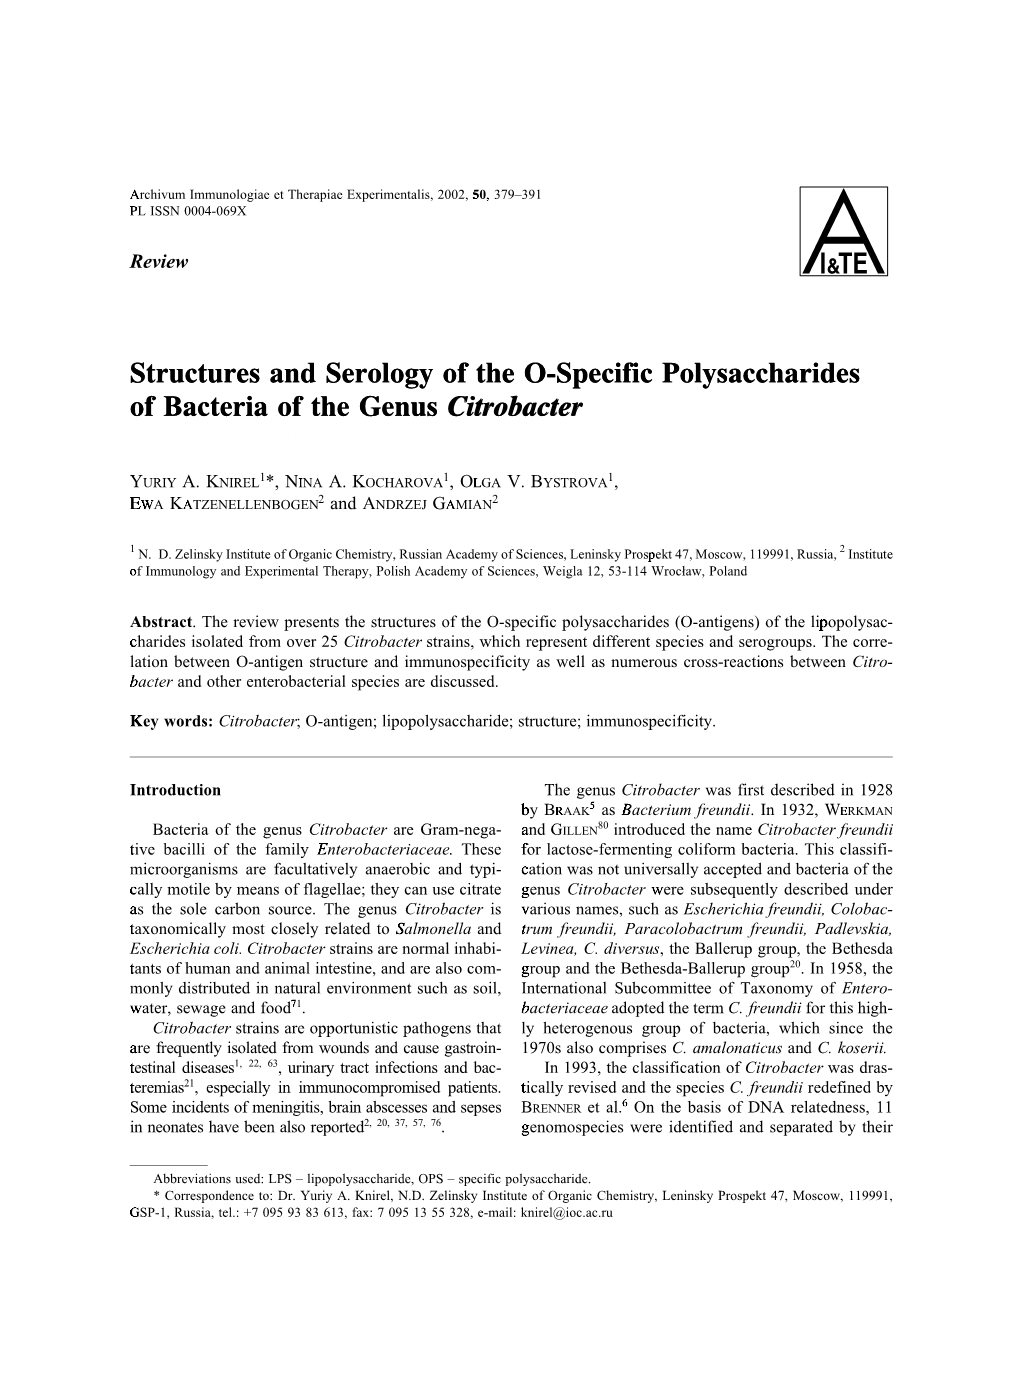 Structures and Serology of the O-Specific Polysaccharides of Bacteria of the Genus Citrobacter